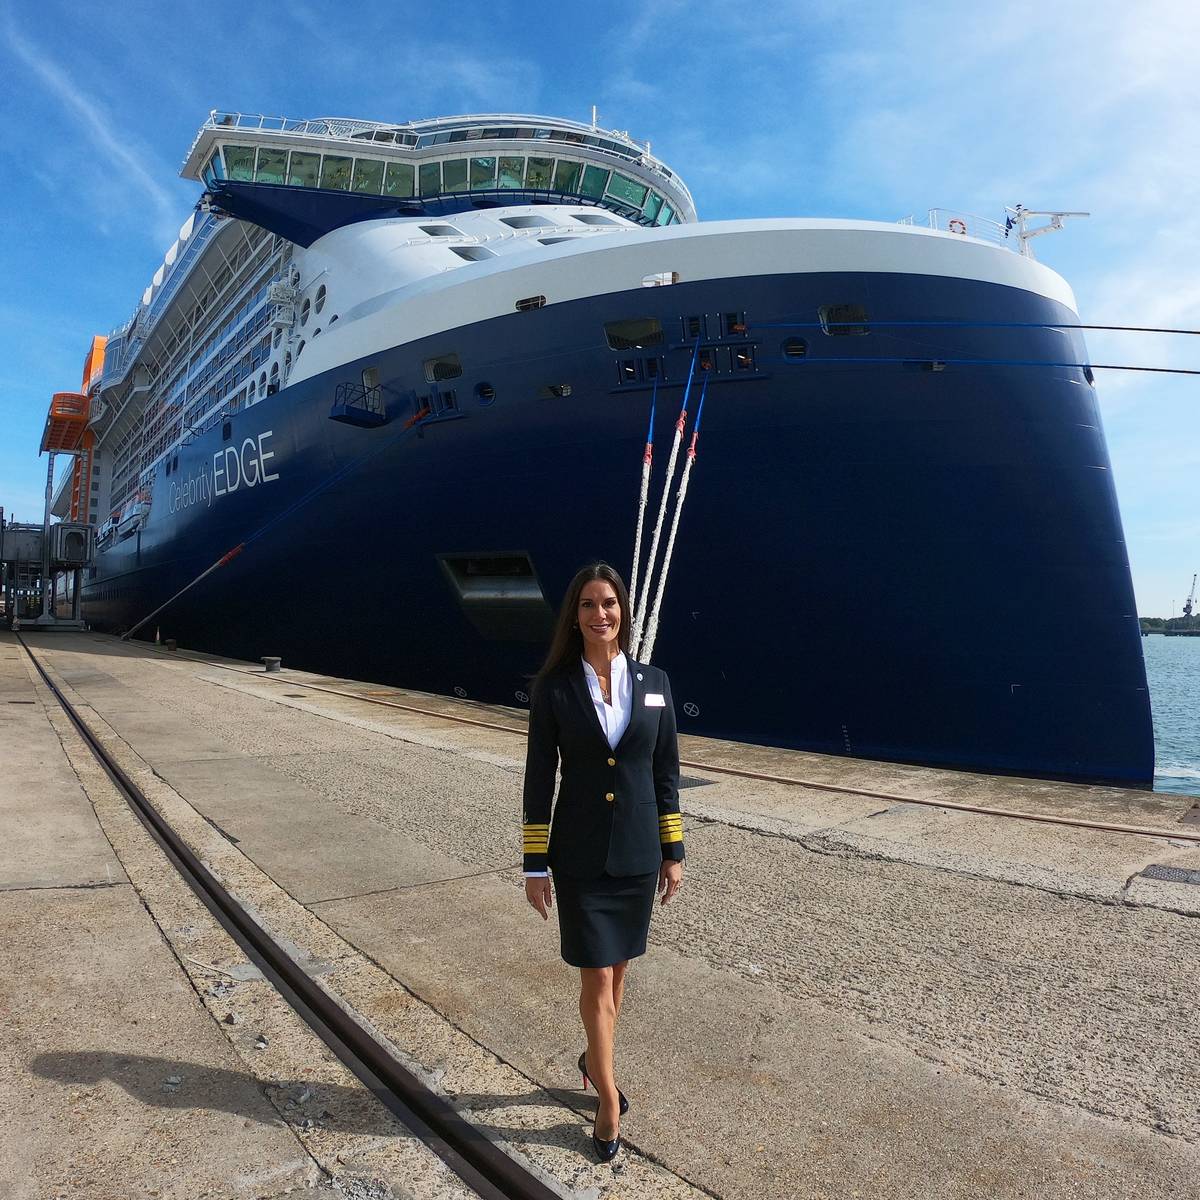 Capt. Kate McCue stands in front of the Celebrity Edge. (Kate McCue)